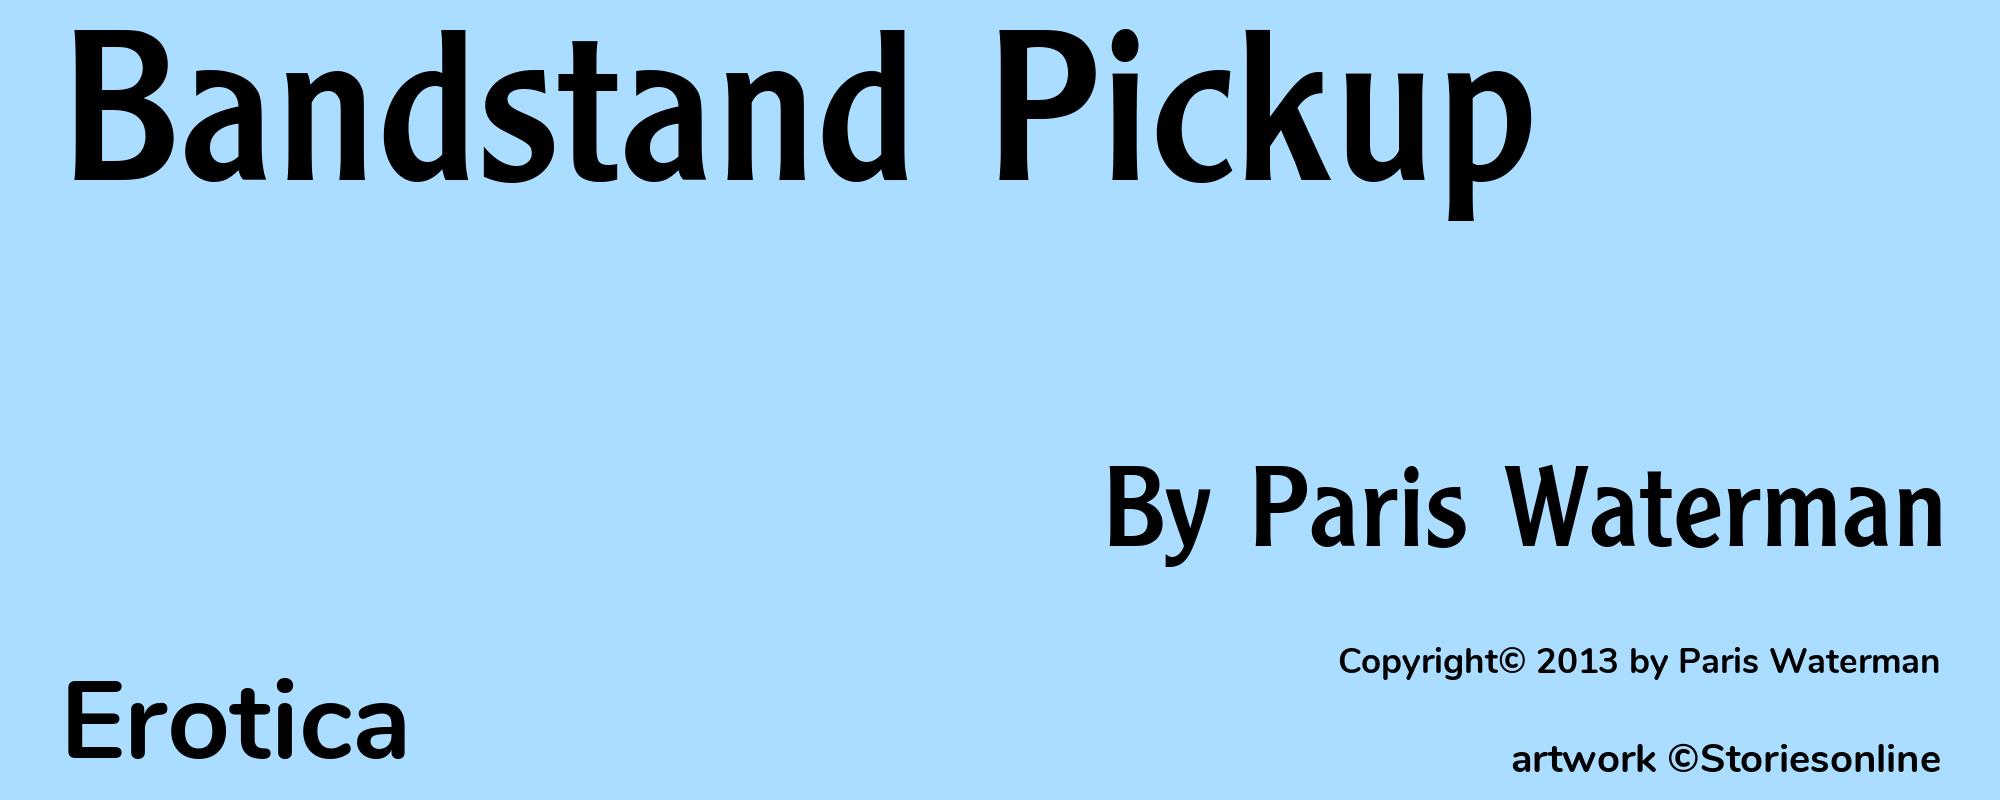 Bandstand Pickup - Cover